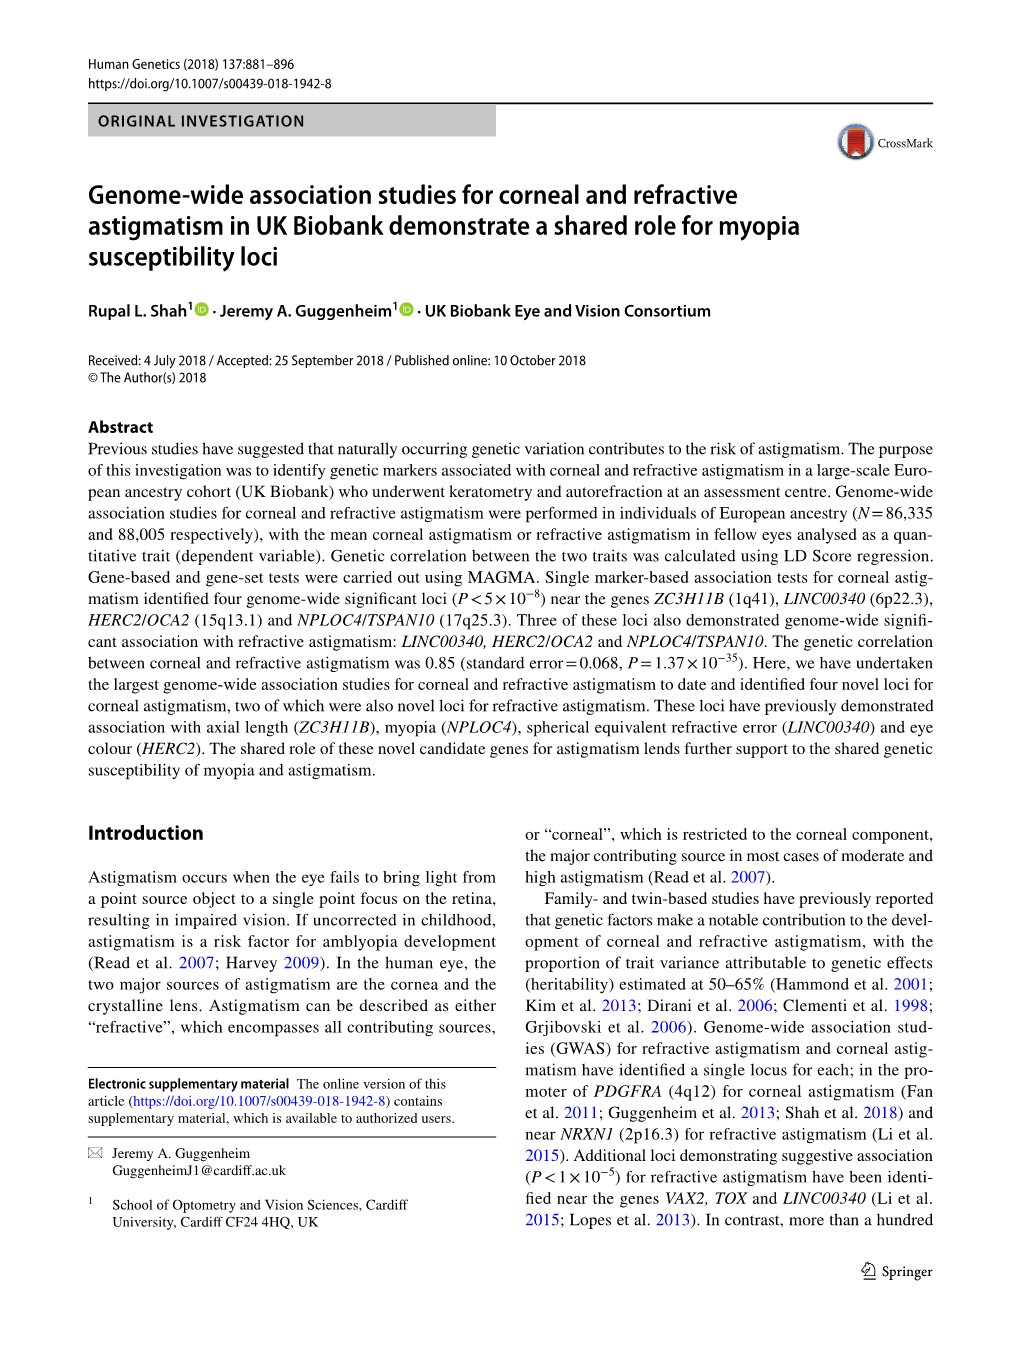 Genome-Wide Association Studies for Corneal and Refractive Astigmatism in UK Biobank Demonstrate a Shared Role for Myopia Susceptibility Loci